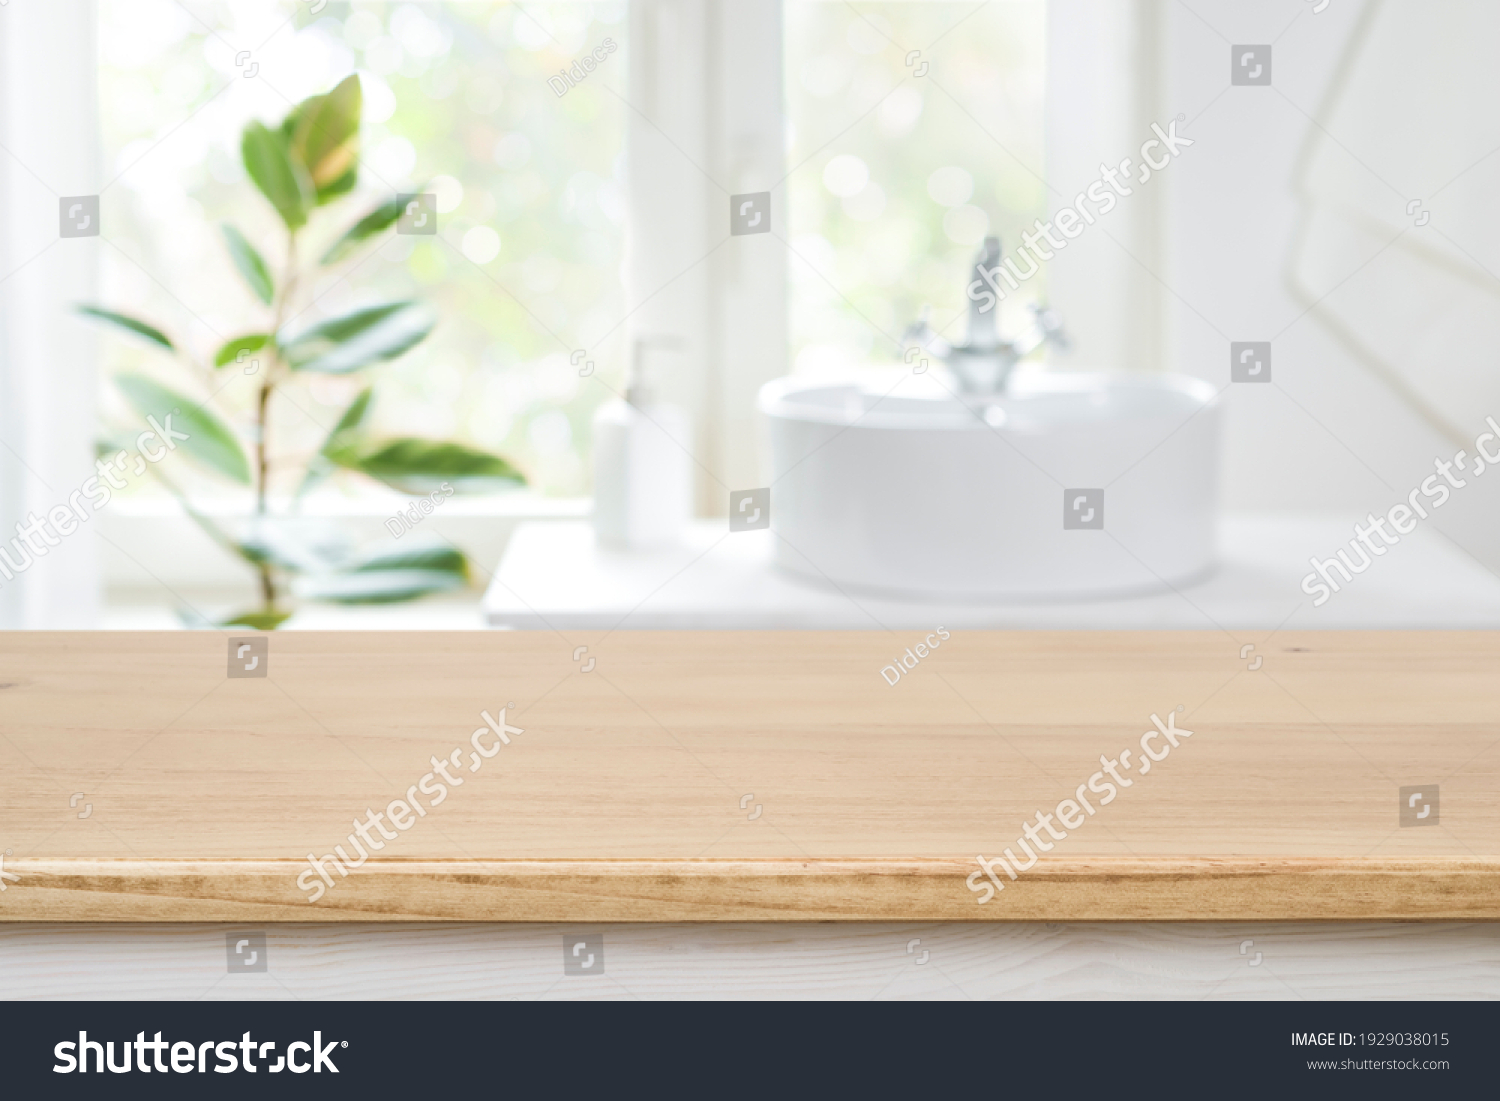 Bathroom sink near window with wooden table in front focus #1929038015